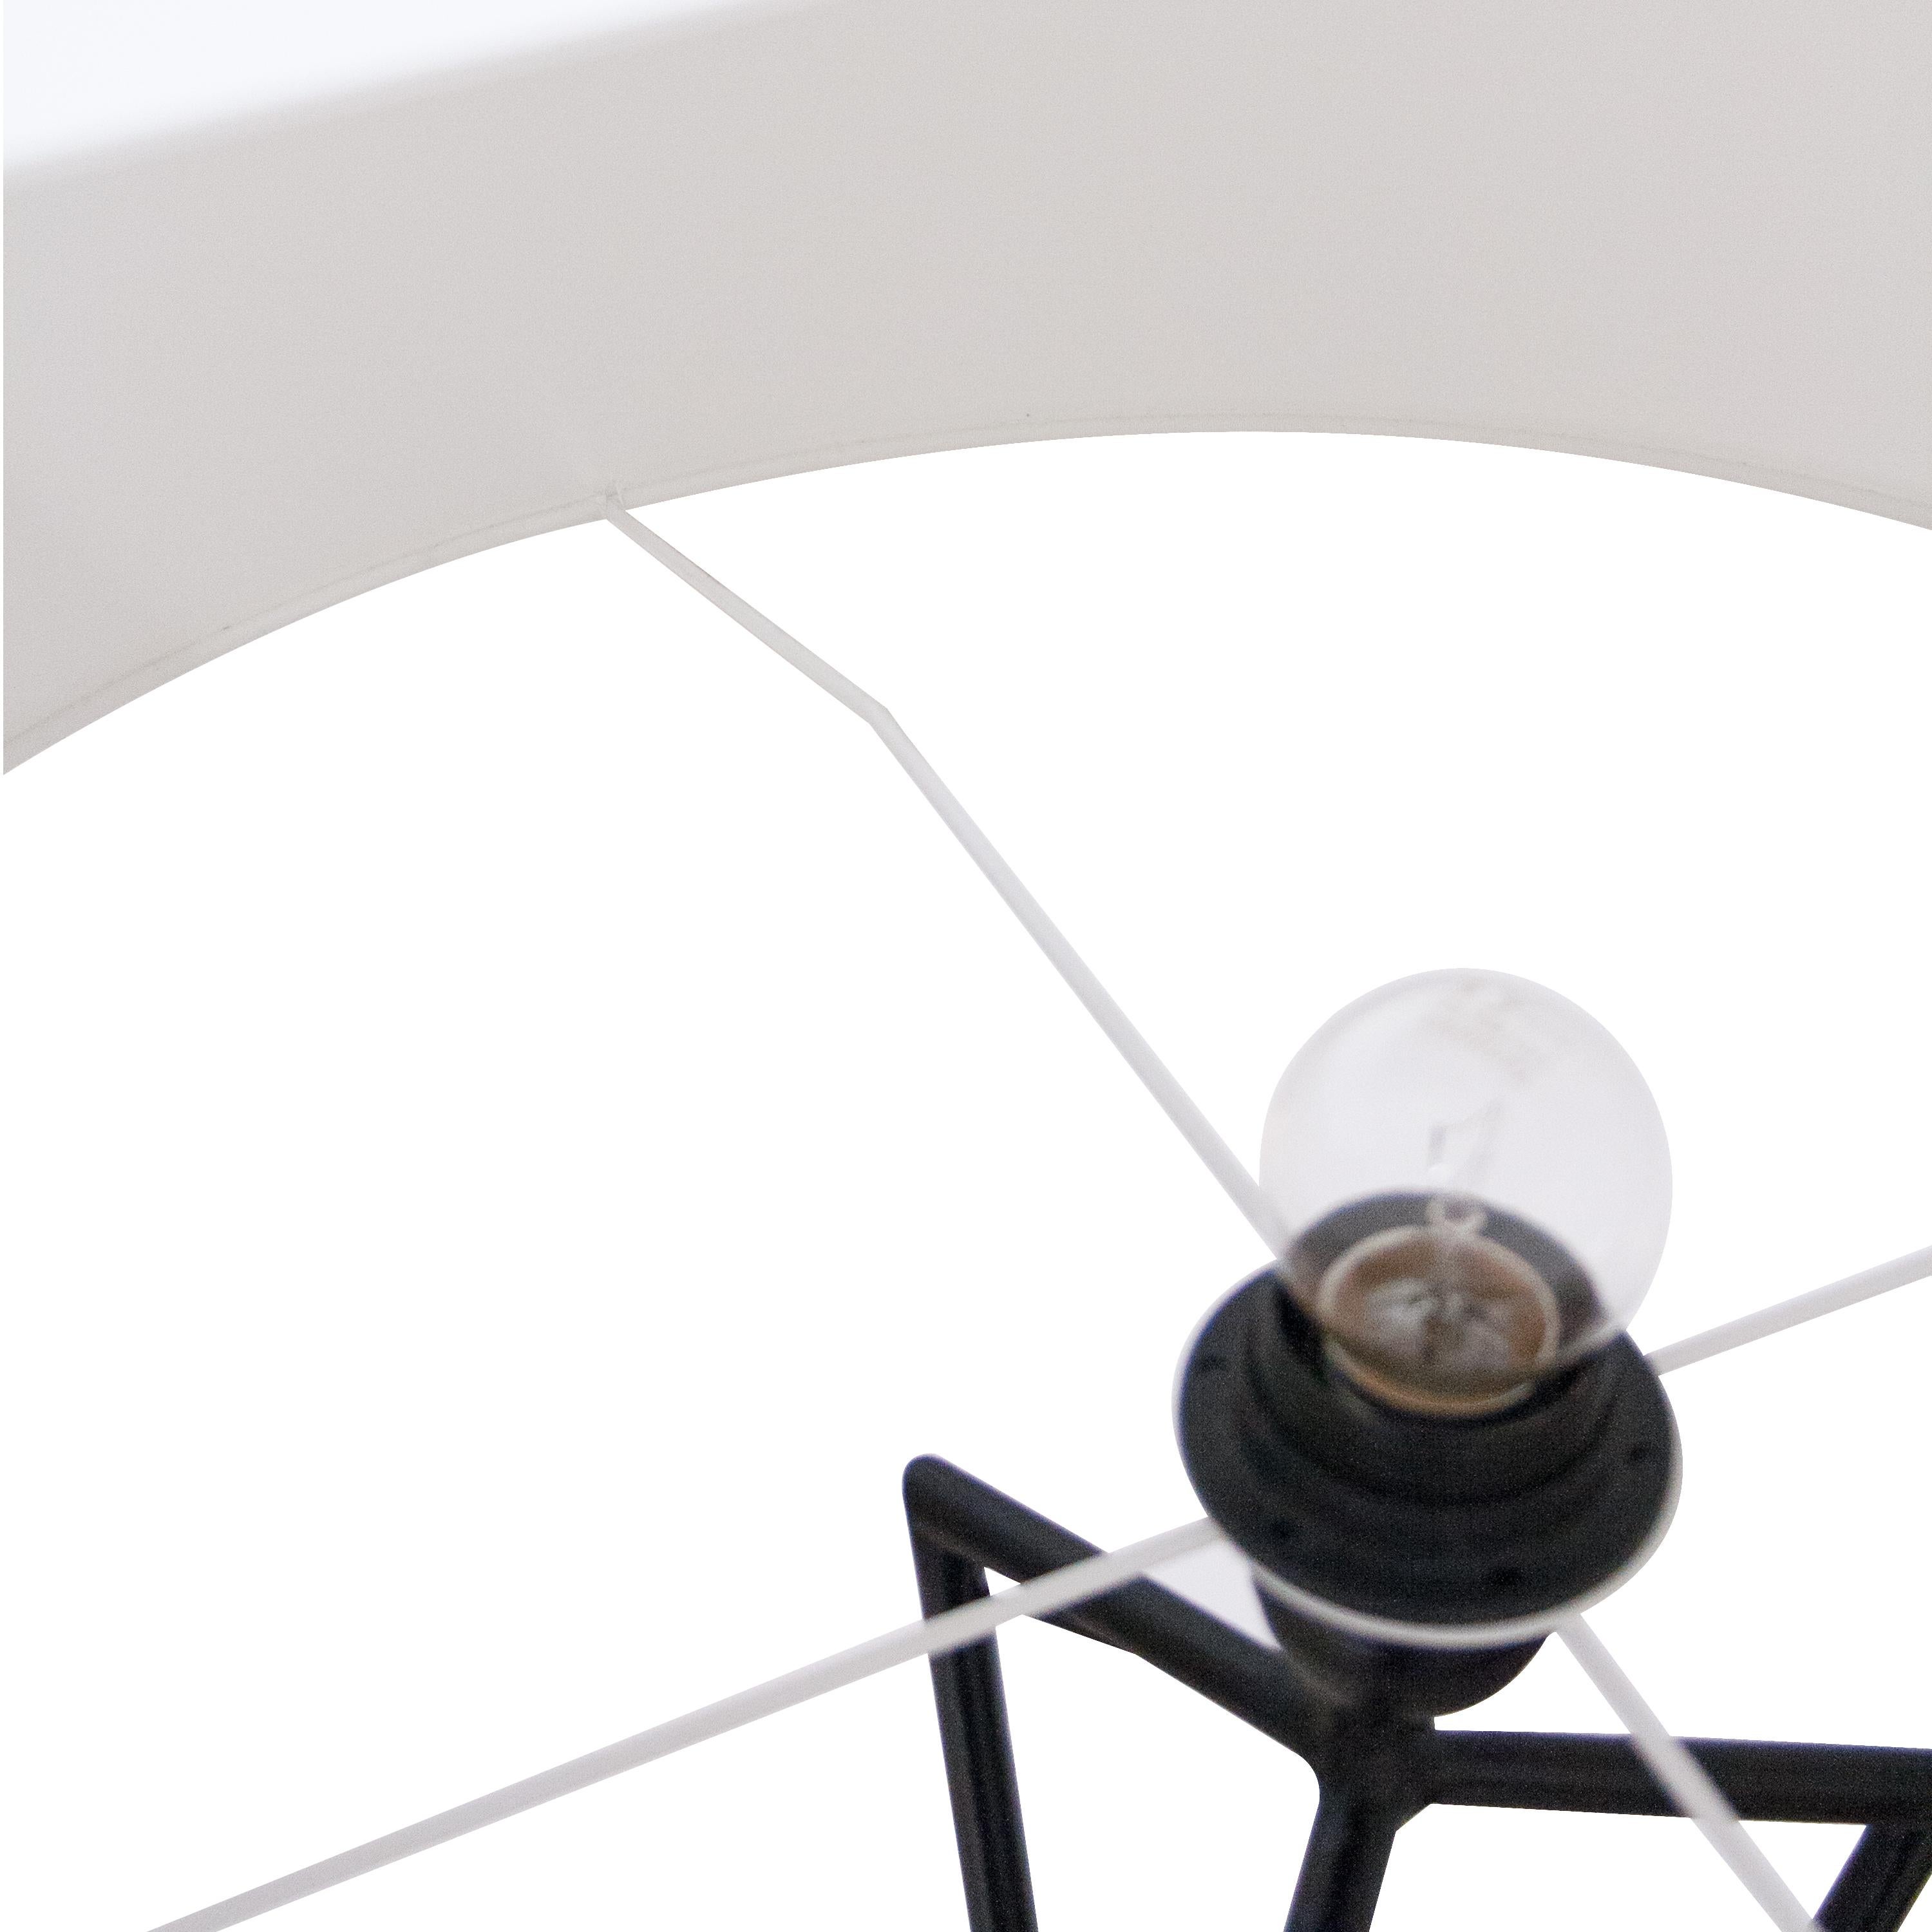 French black lacquered flor lamp with white shade, details in bronze original from the 1950's.